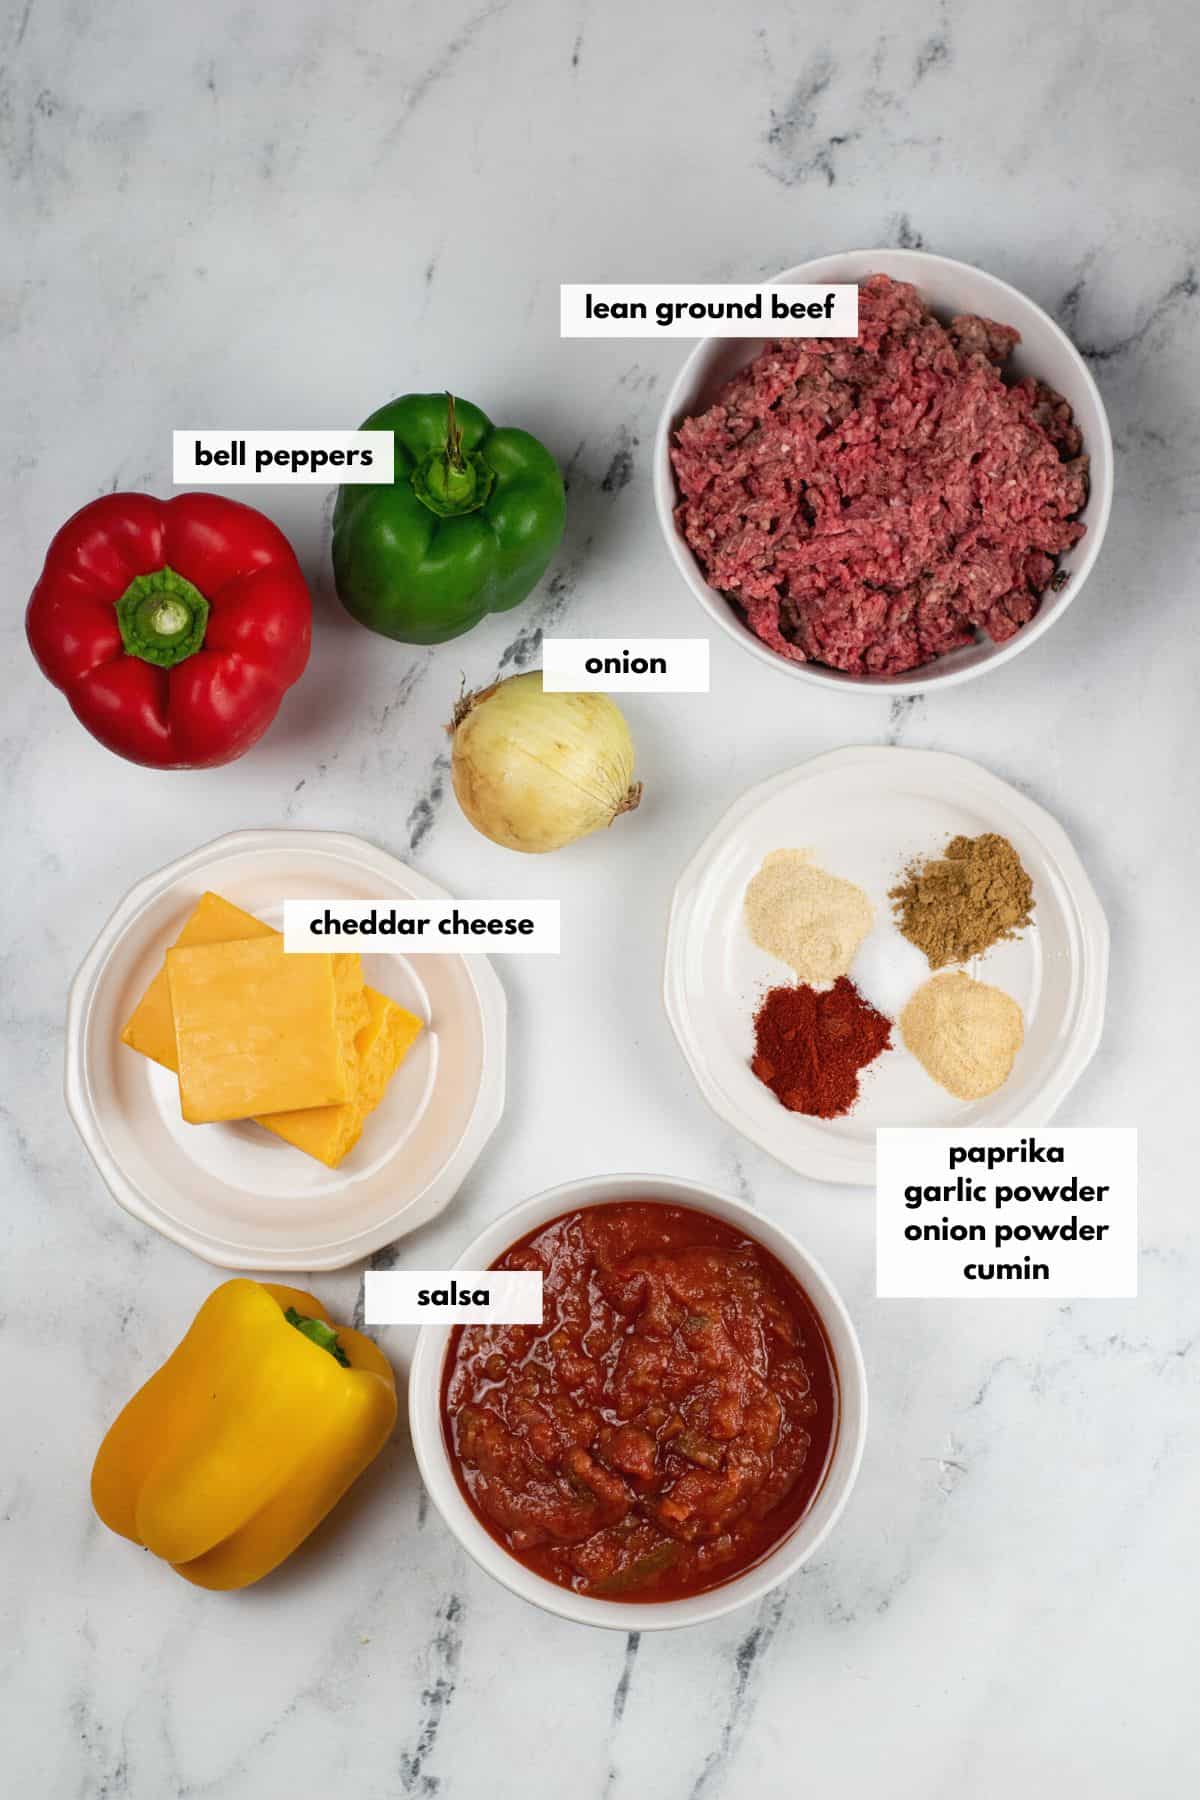 Ingredients to make taco stuffed peppers include beef, salsa, onion, cheddar cheese, garlic powder, onion powder, cumin and paprika.